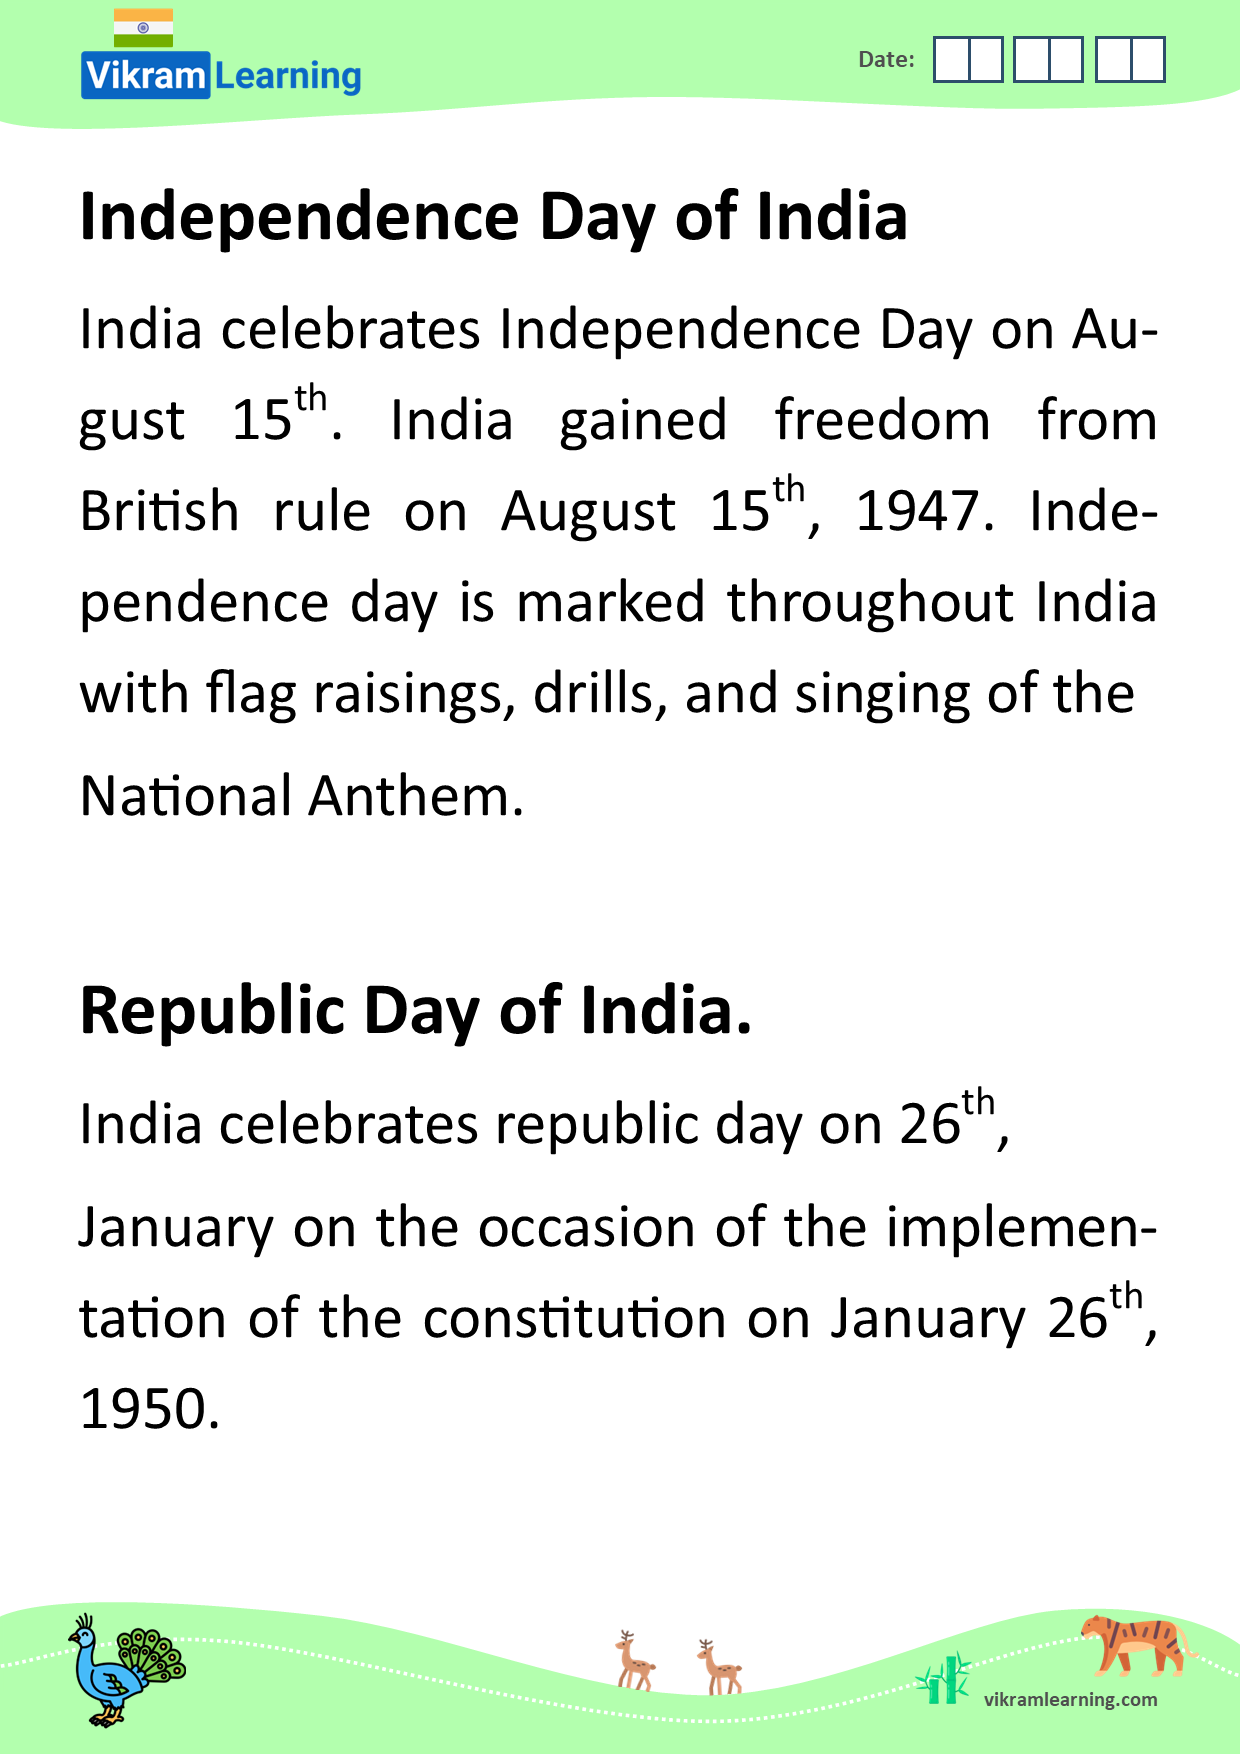 Download independence day and republic day of india worksheets